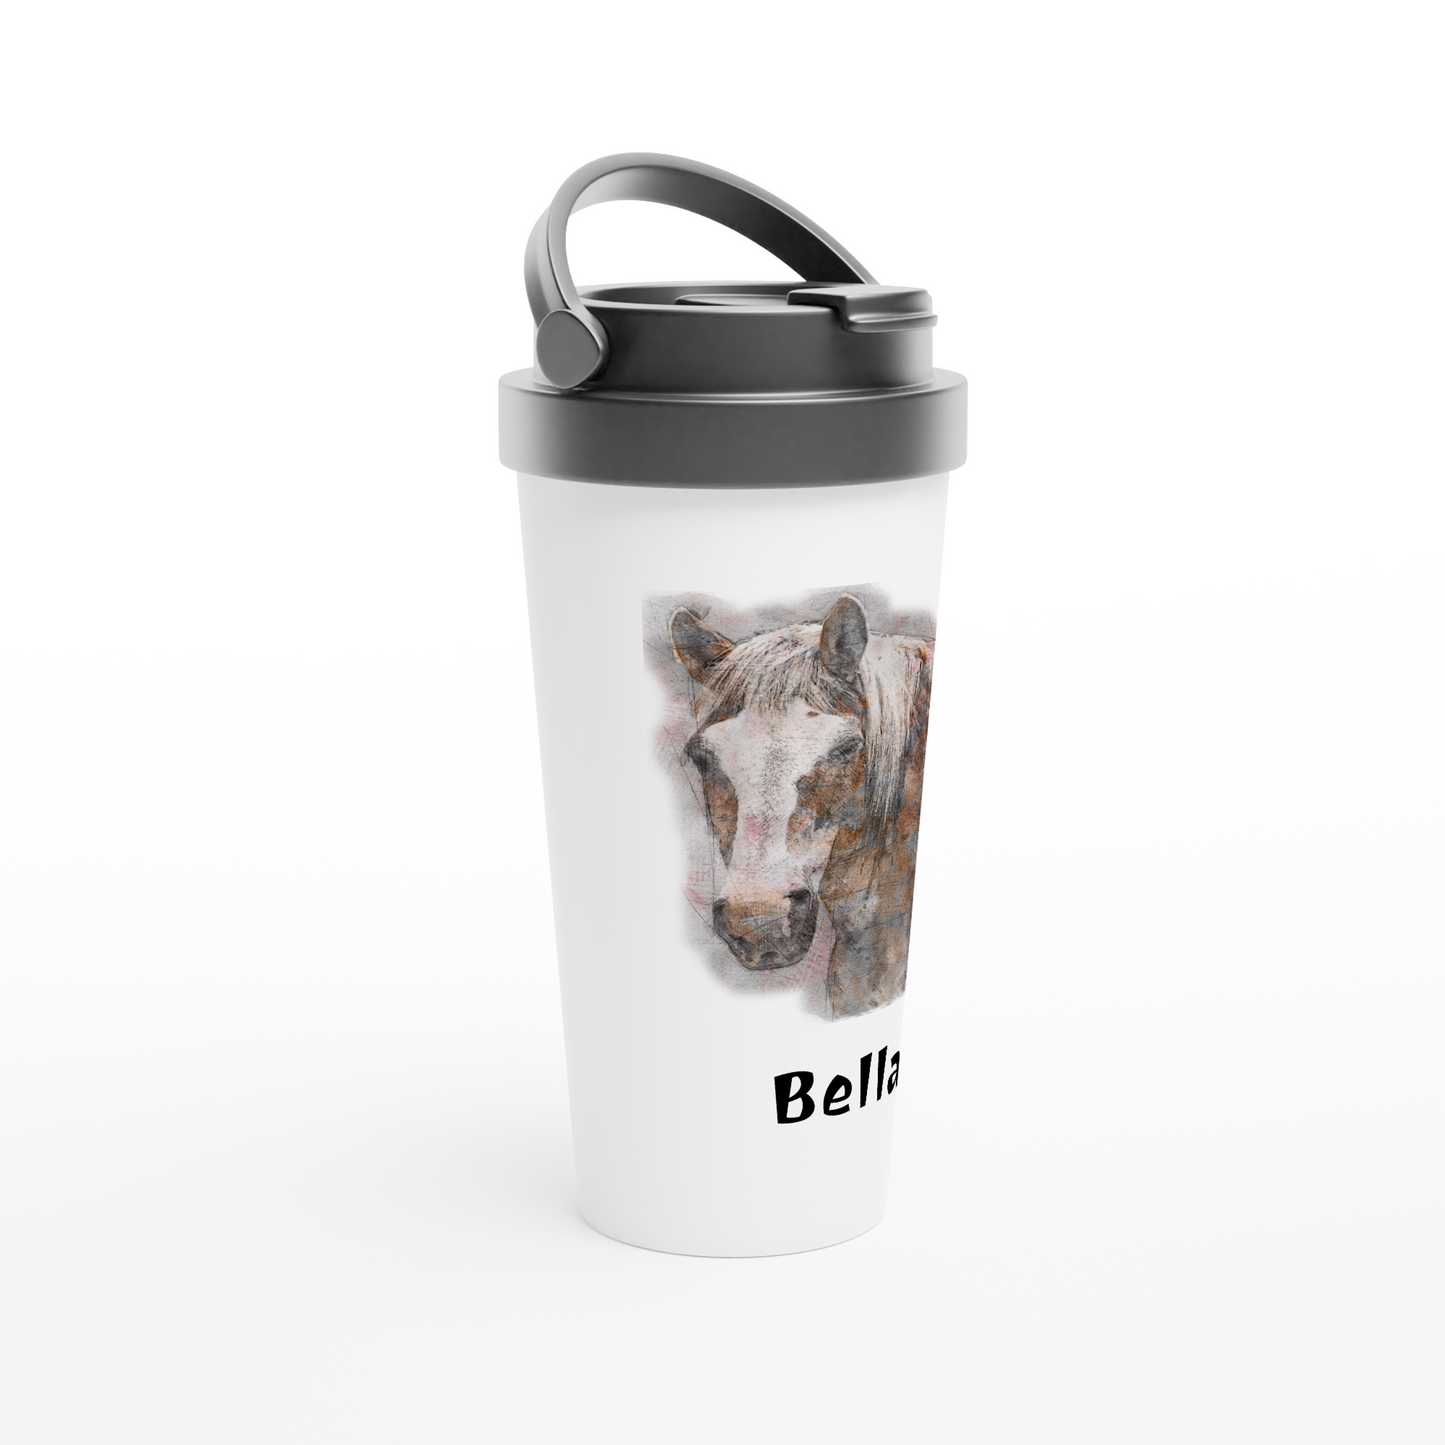 Hand Drawn Horse || 15oz Stainless Steel Travel Mug - Pencil Drawing - Personalized; Personalized with your horse